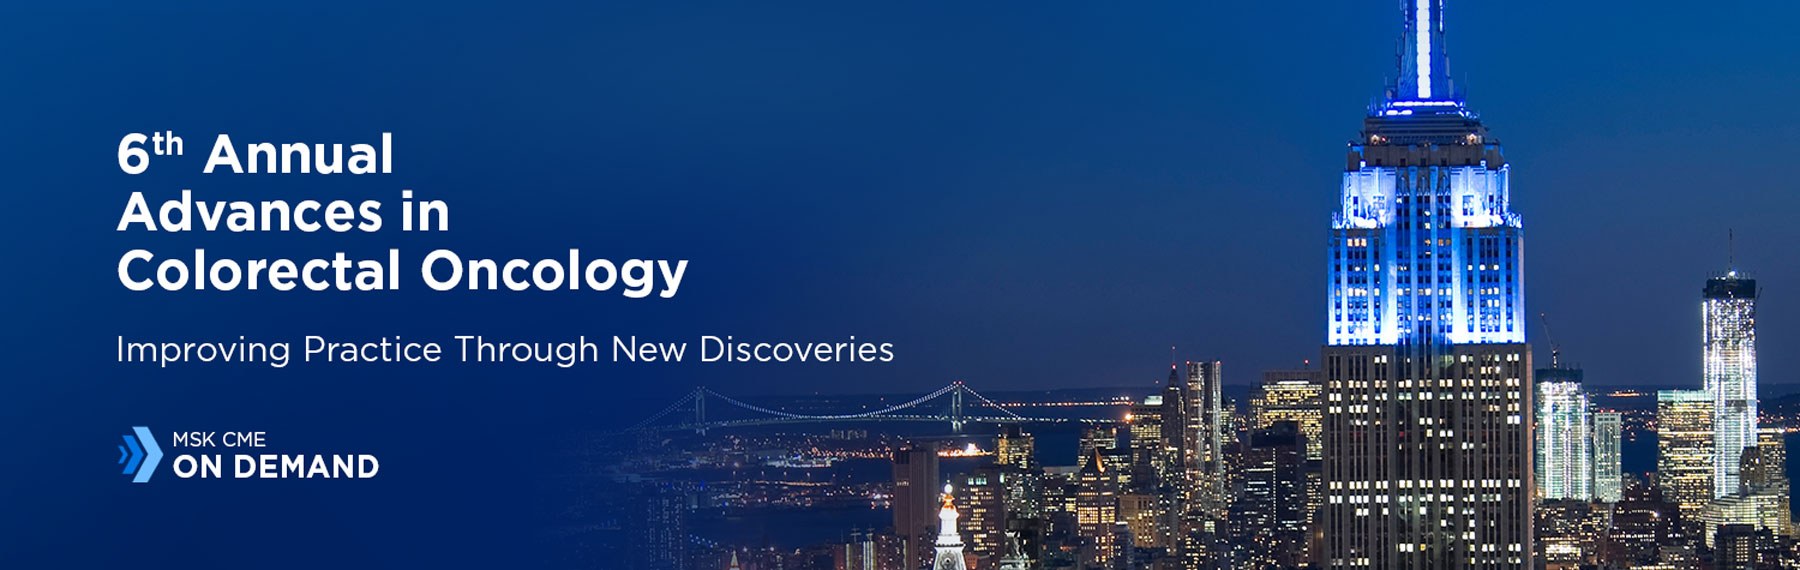 6th Annual Advances in Colorectal Oncology: Improving Practice Through New Discoveries - On Demand Banner